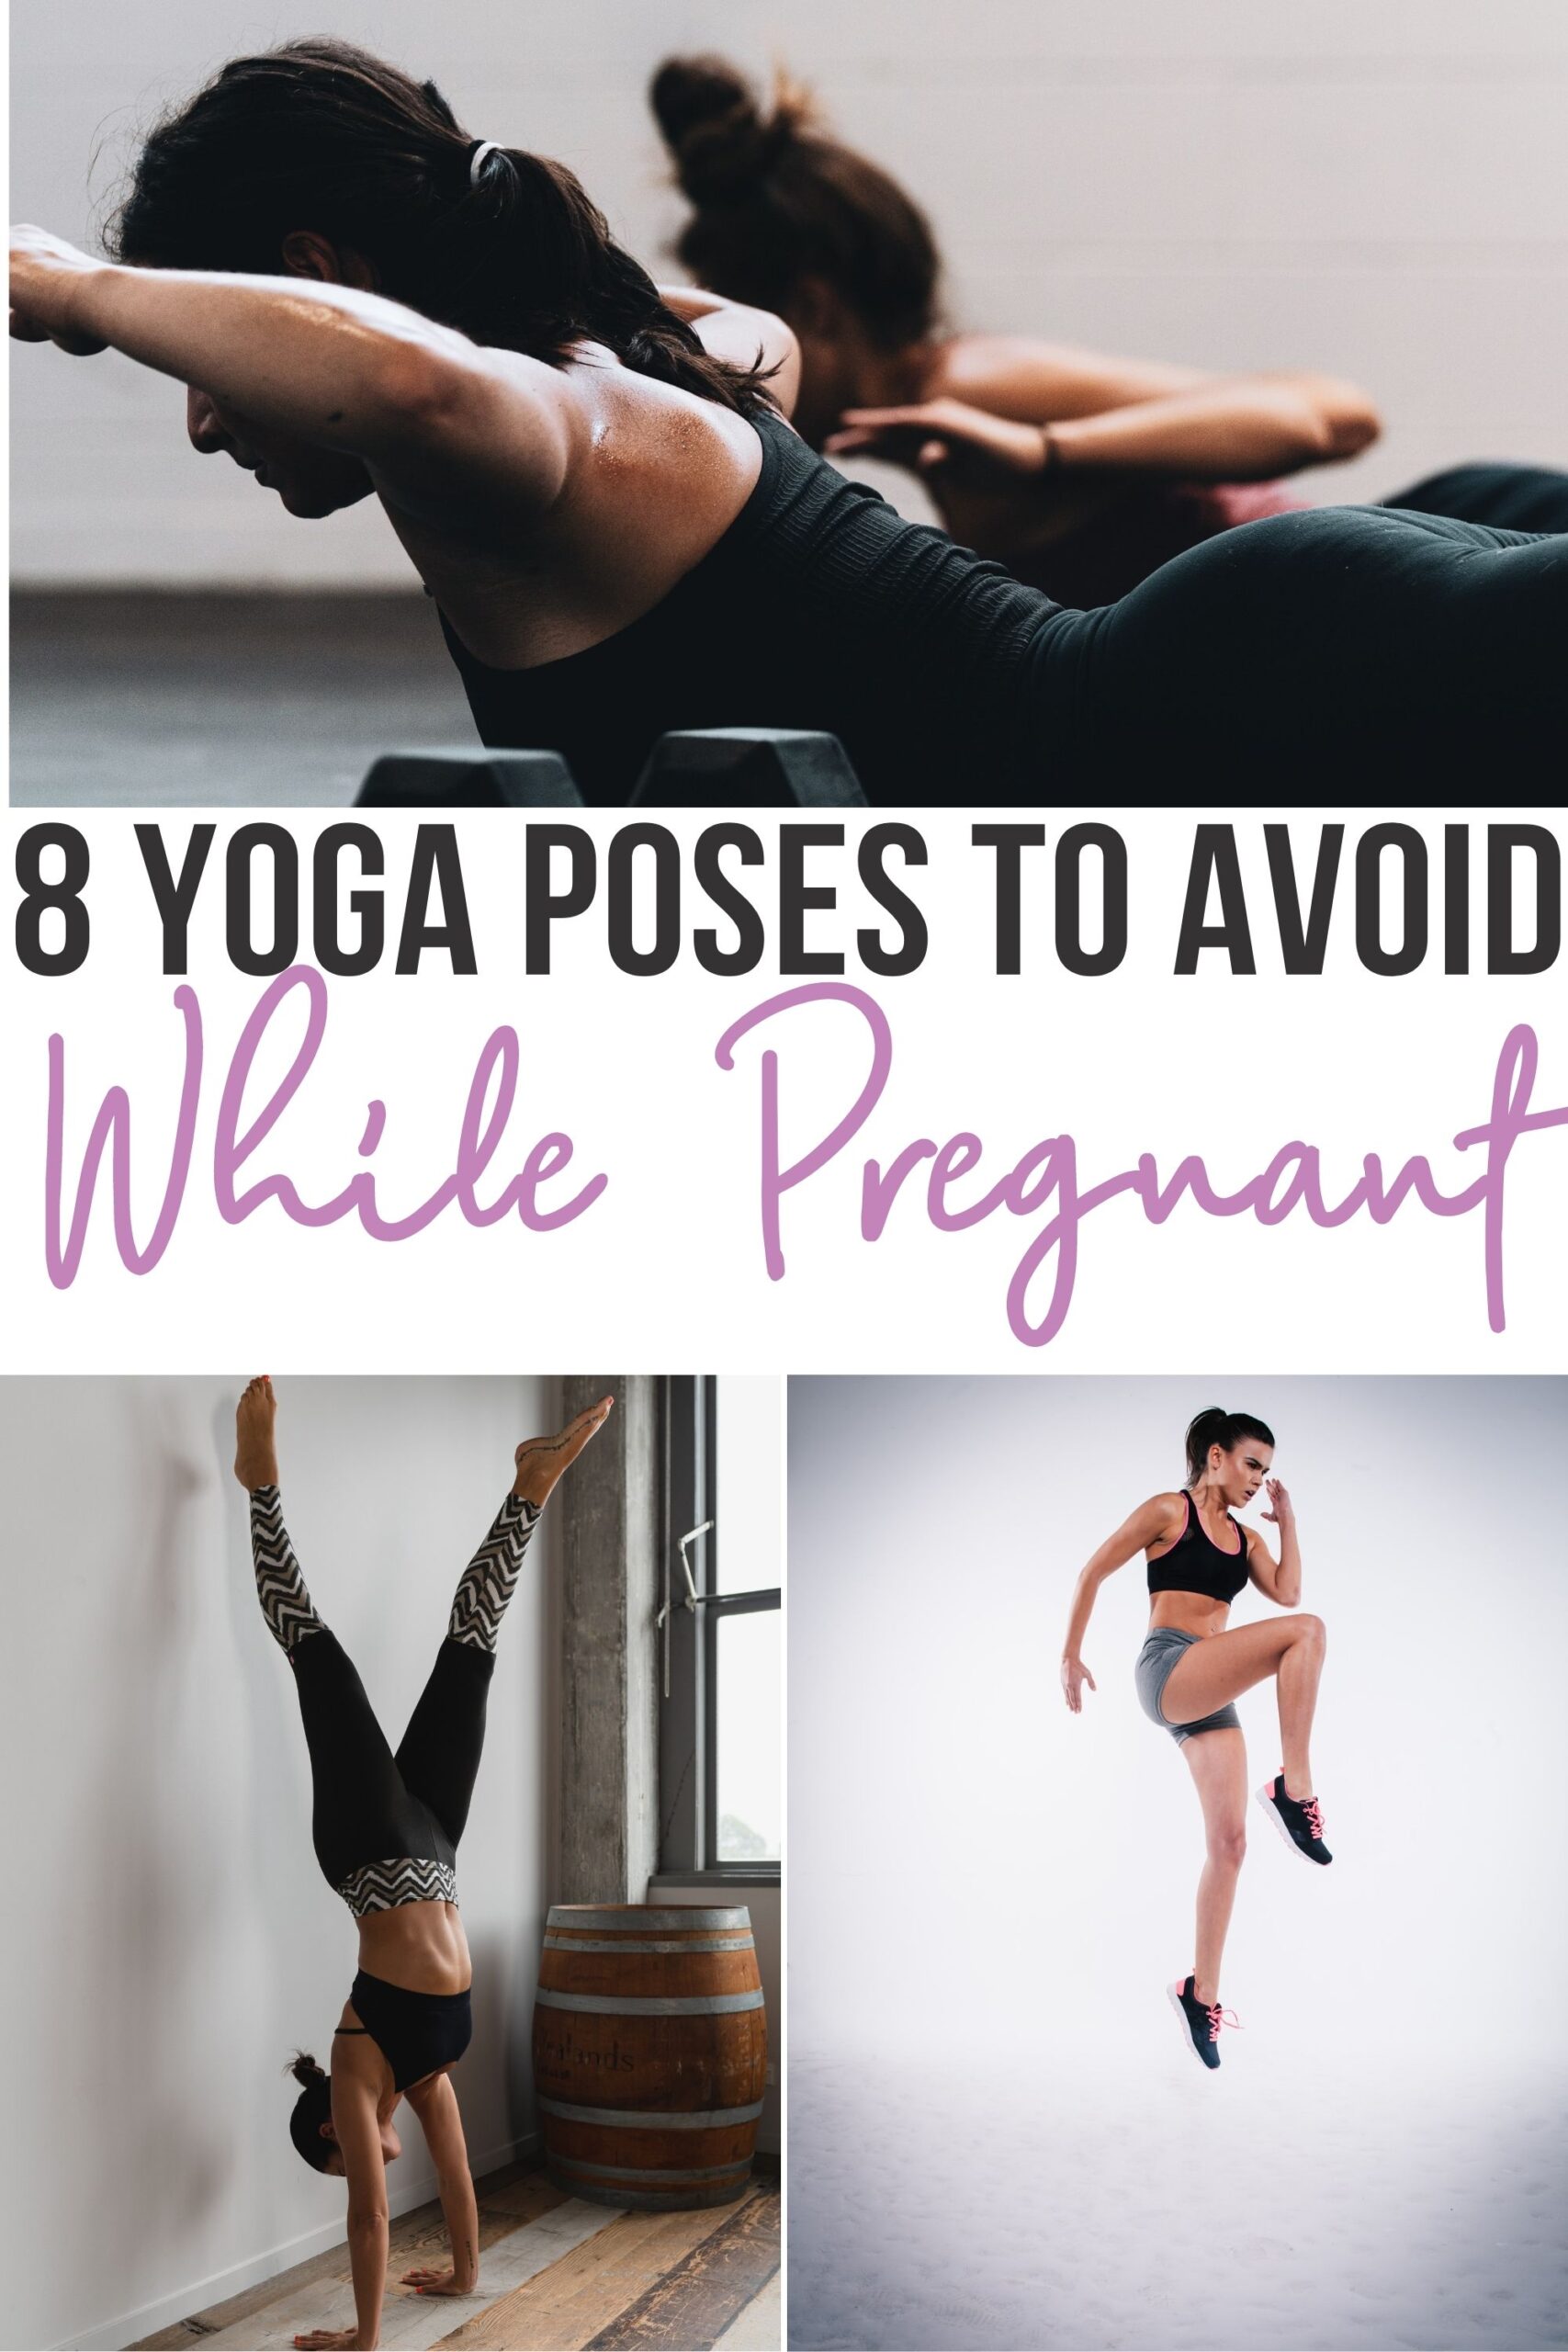 Yoga Poses for Every Trimester of Pregnancy | Yoga For The Soul | HT  Lifestyle - YouTube